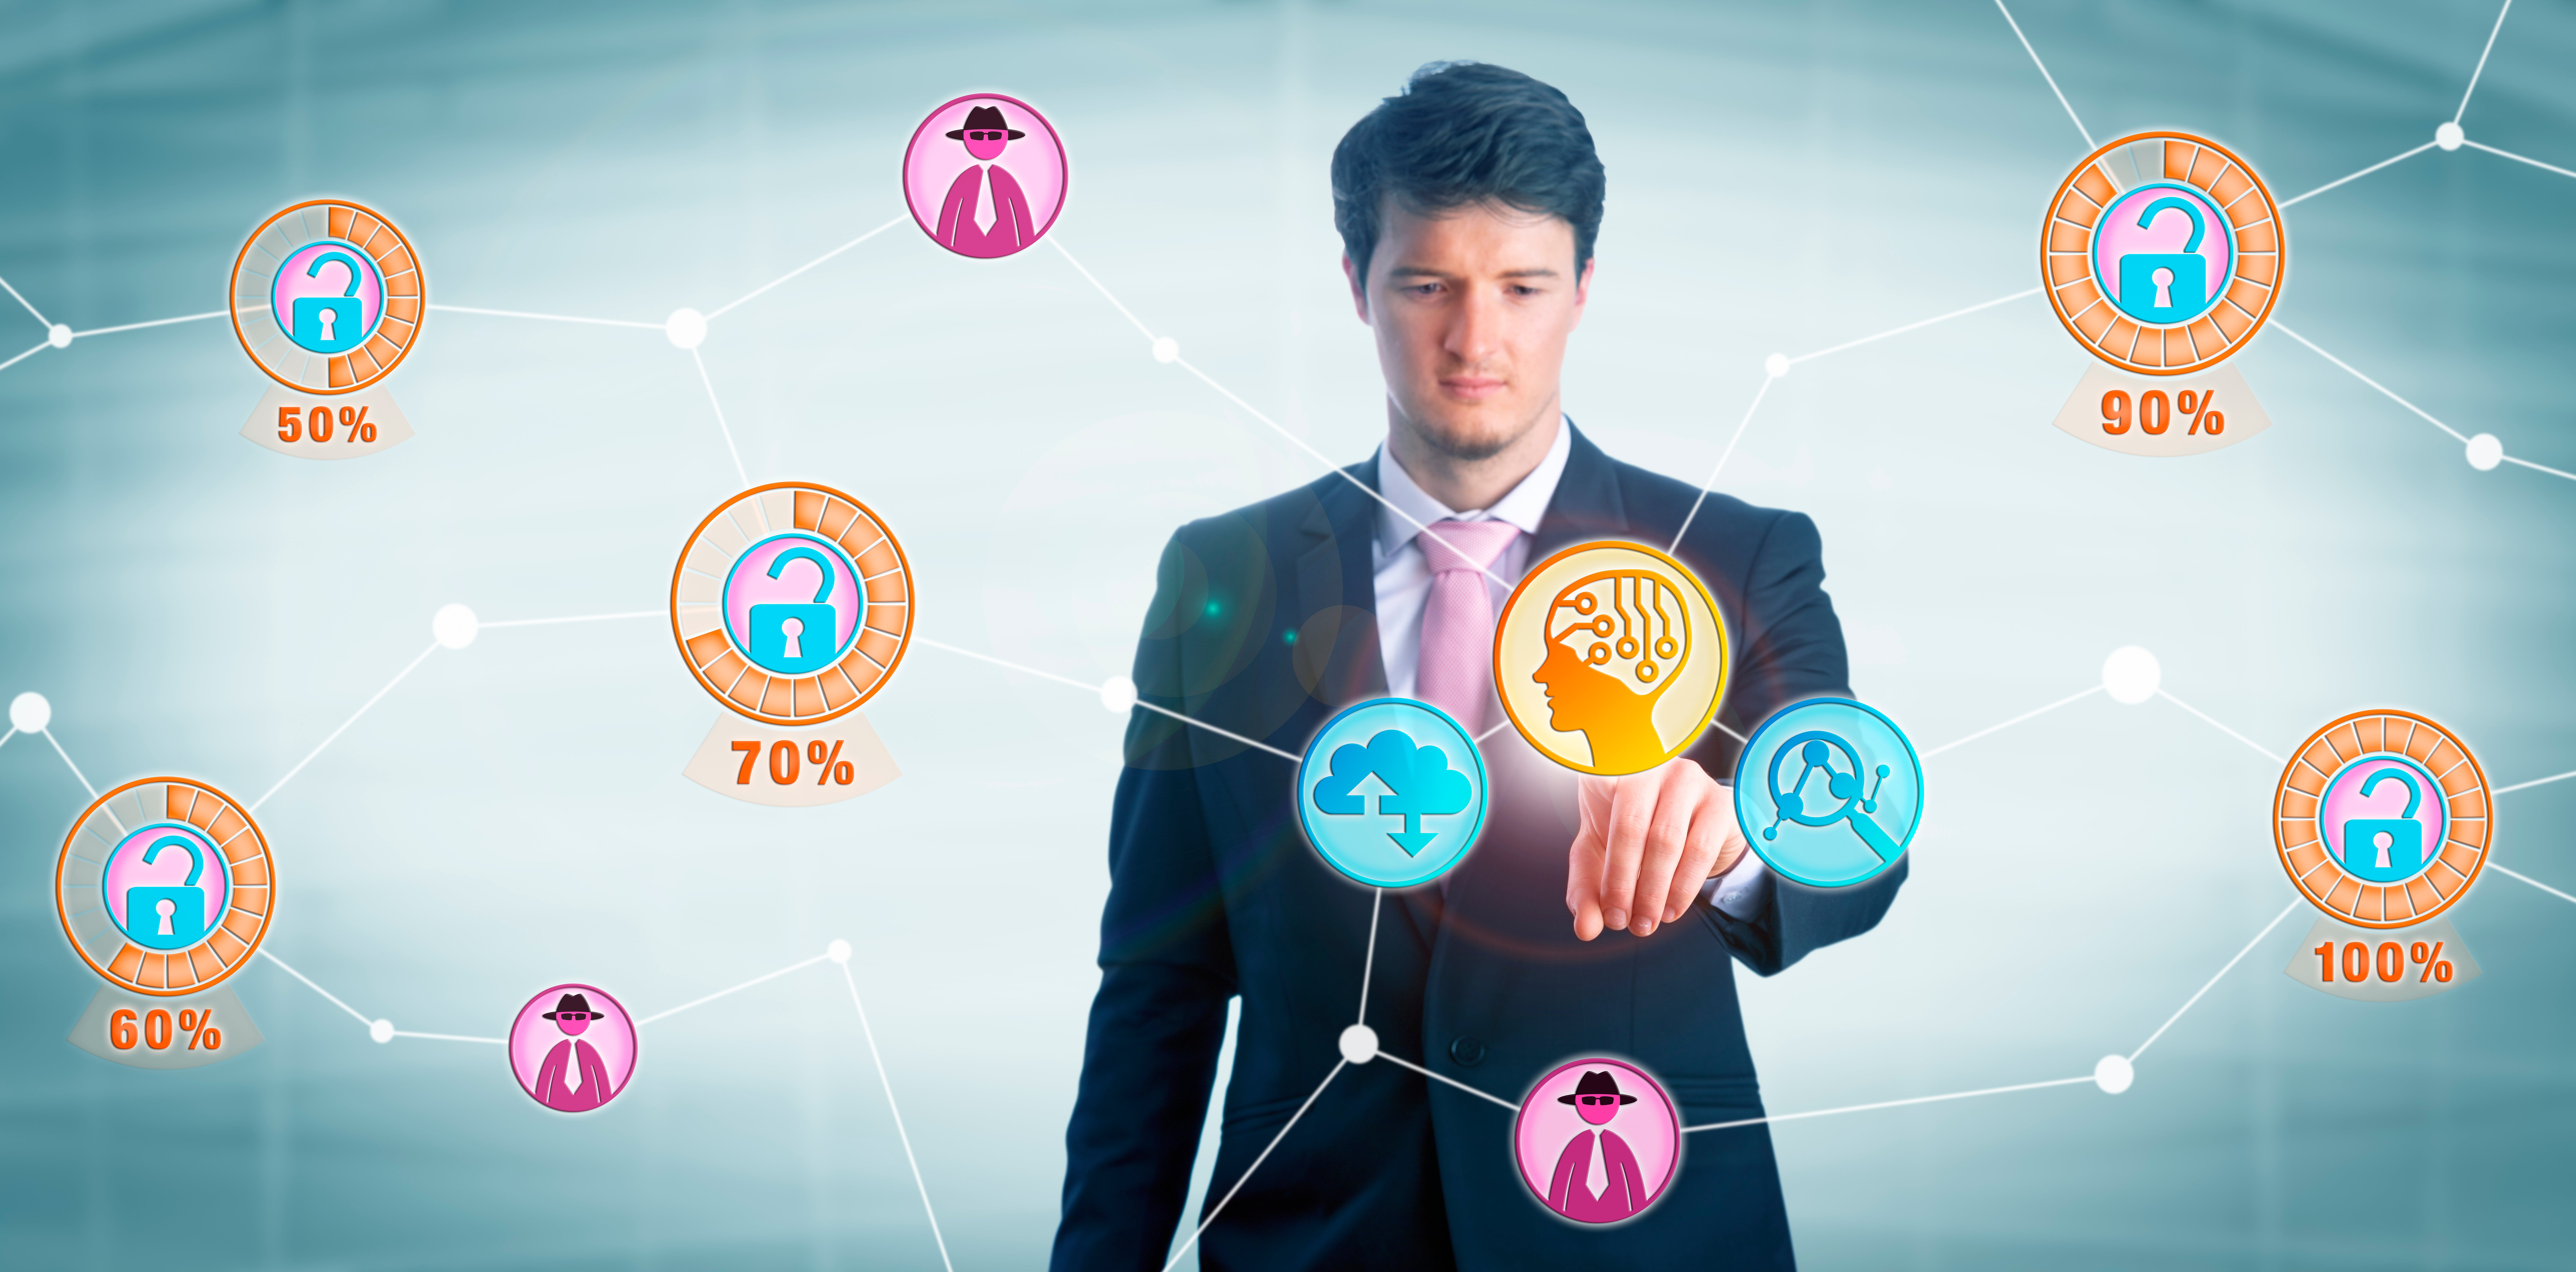 Businessman pointing toward icons on a screen, representing a cybersecurity assessment.